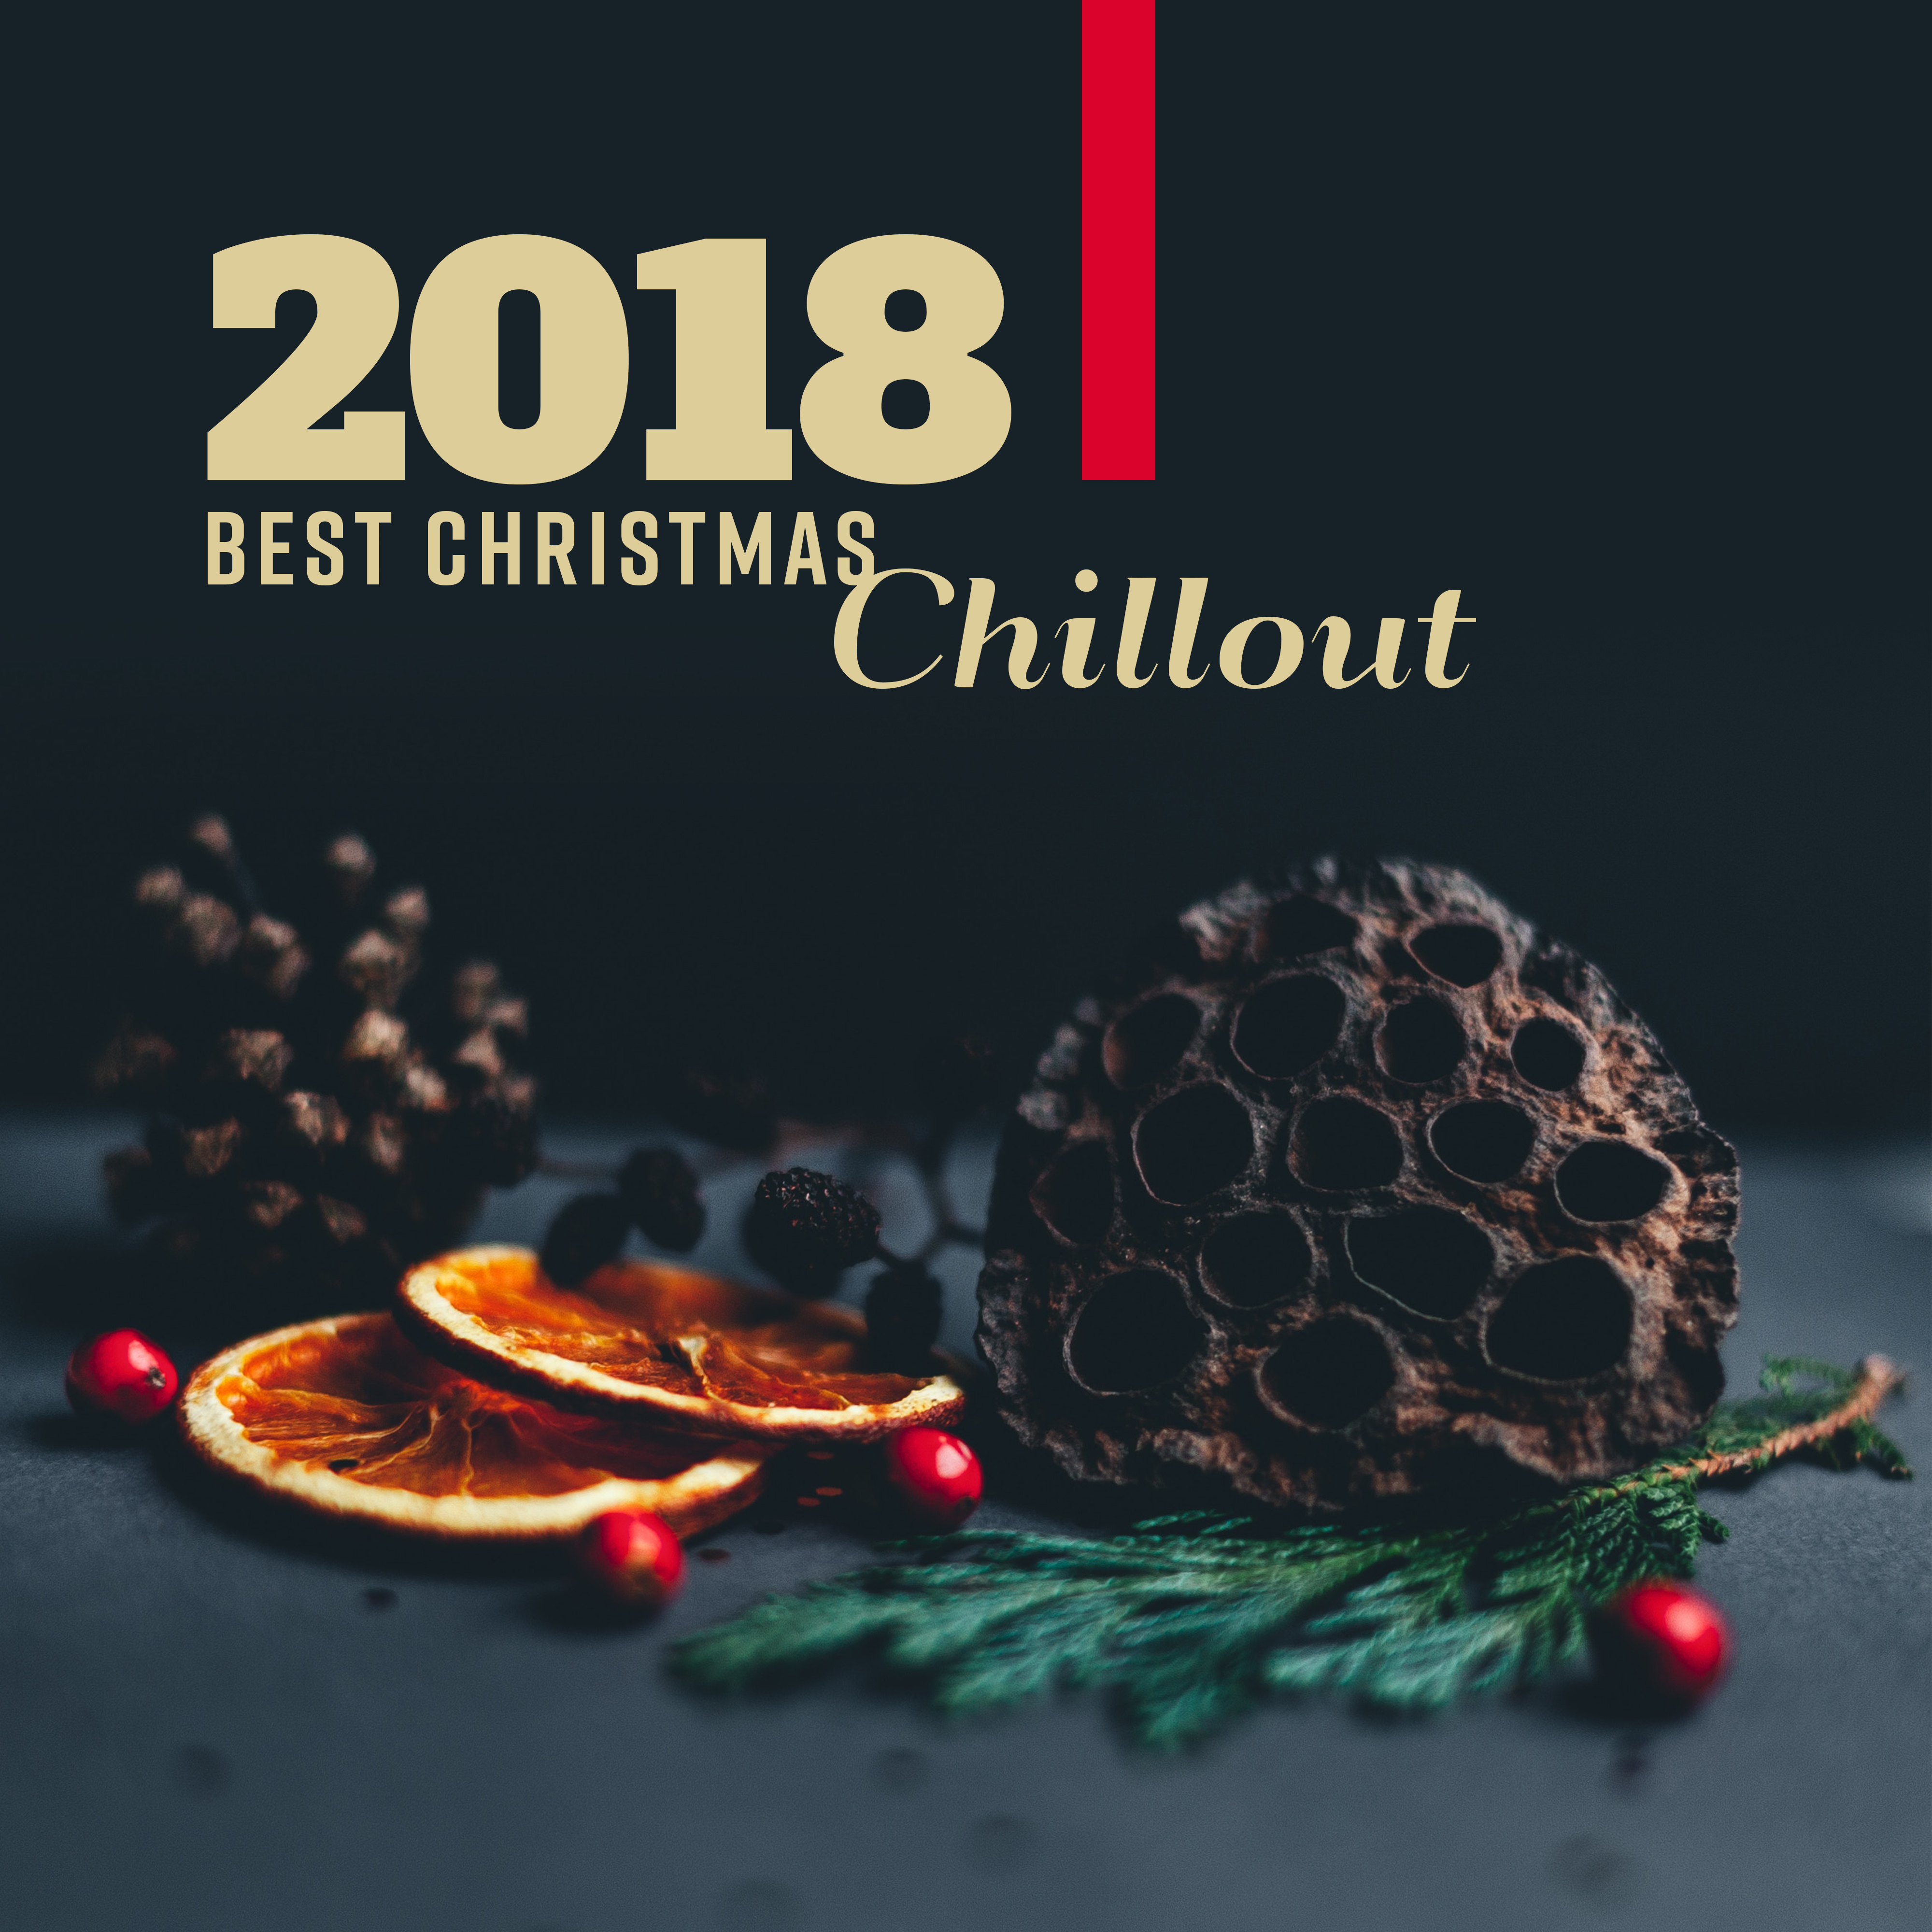 2018 Best Christmas Chillout